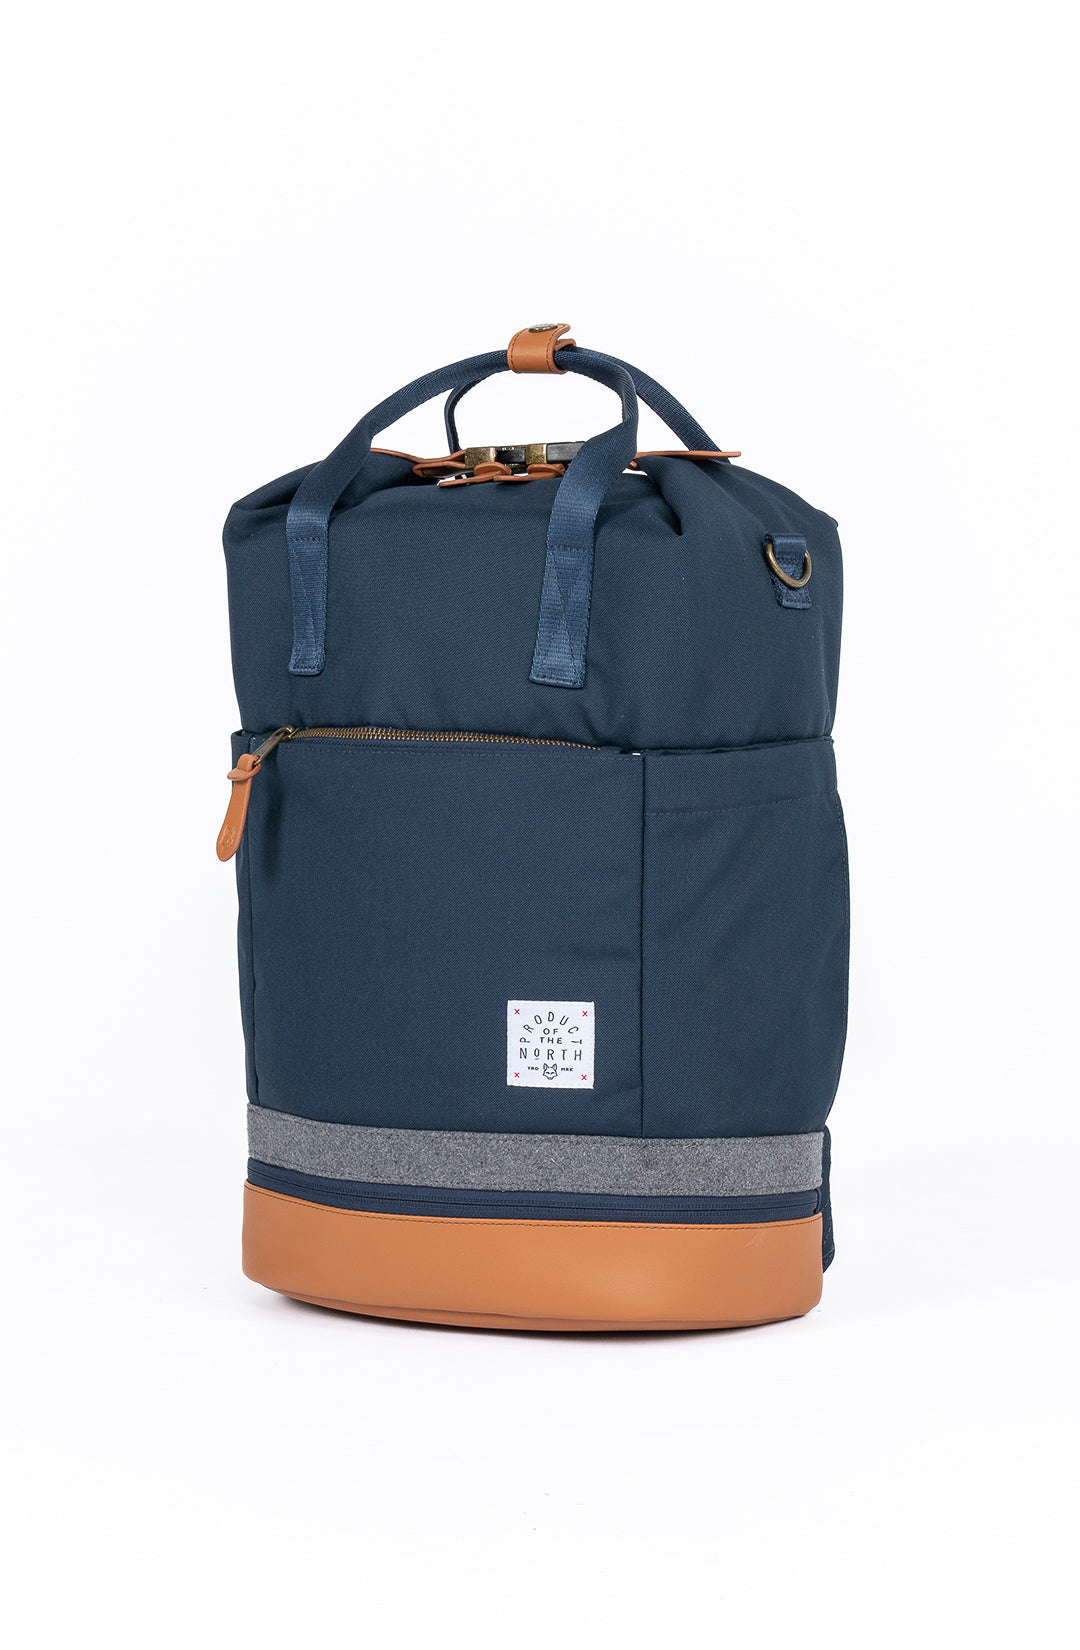 Avalon Diaper Bag Backpack - Navy [Sustainable] // POTN – Product of ...